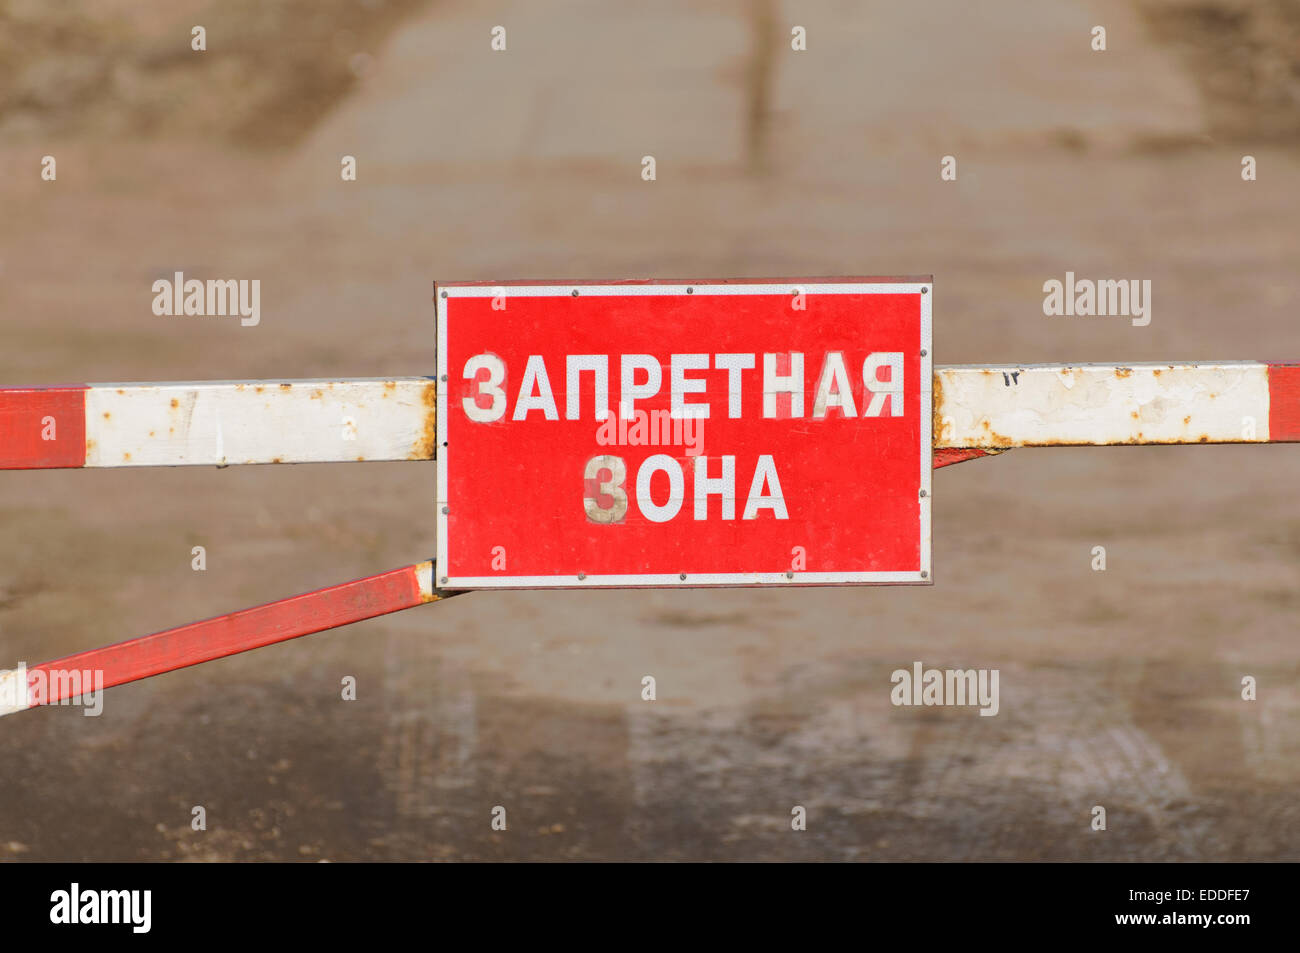 Restricted area sign for airport landing zone Stock Photo